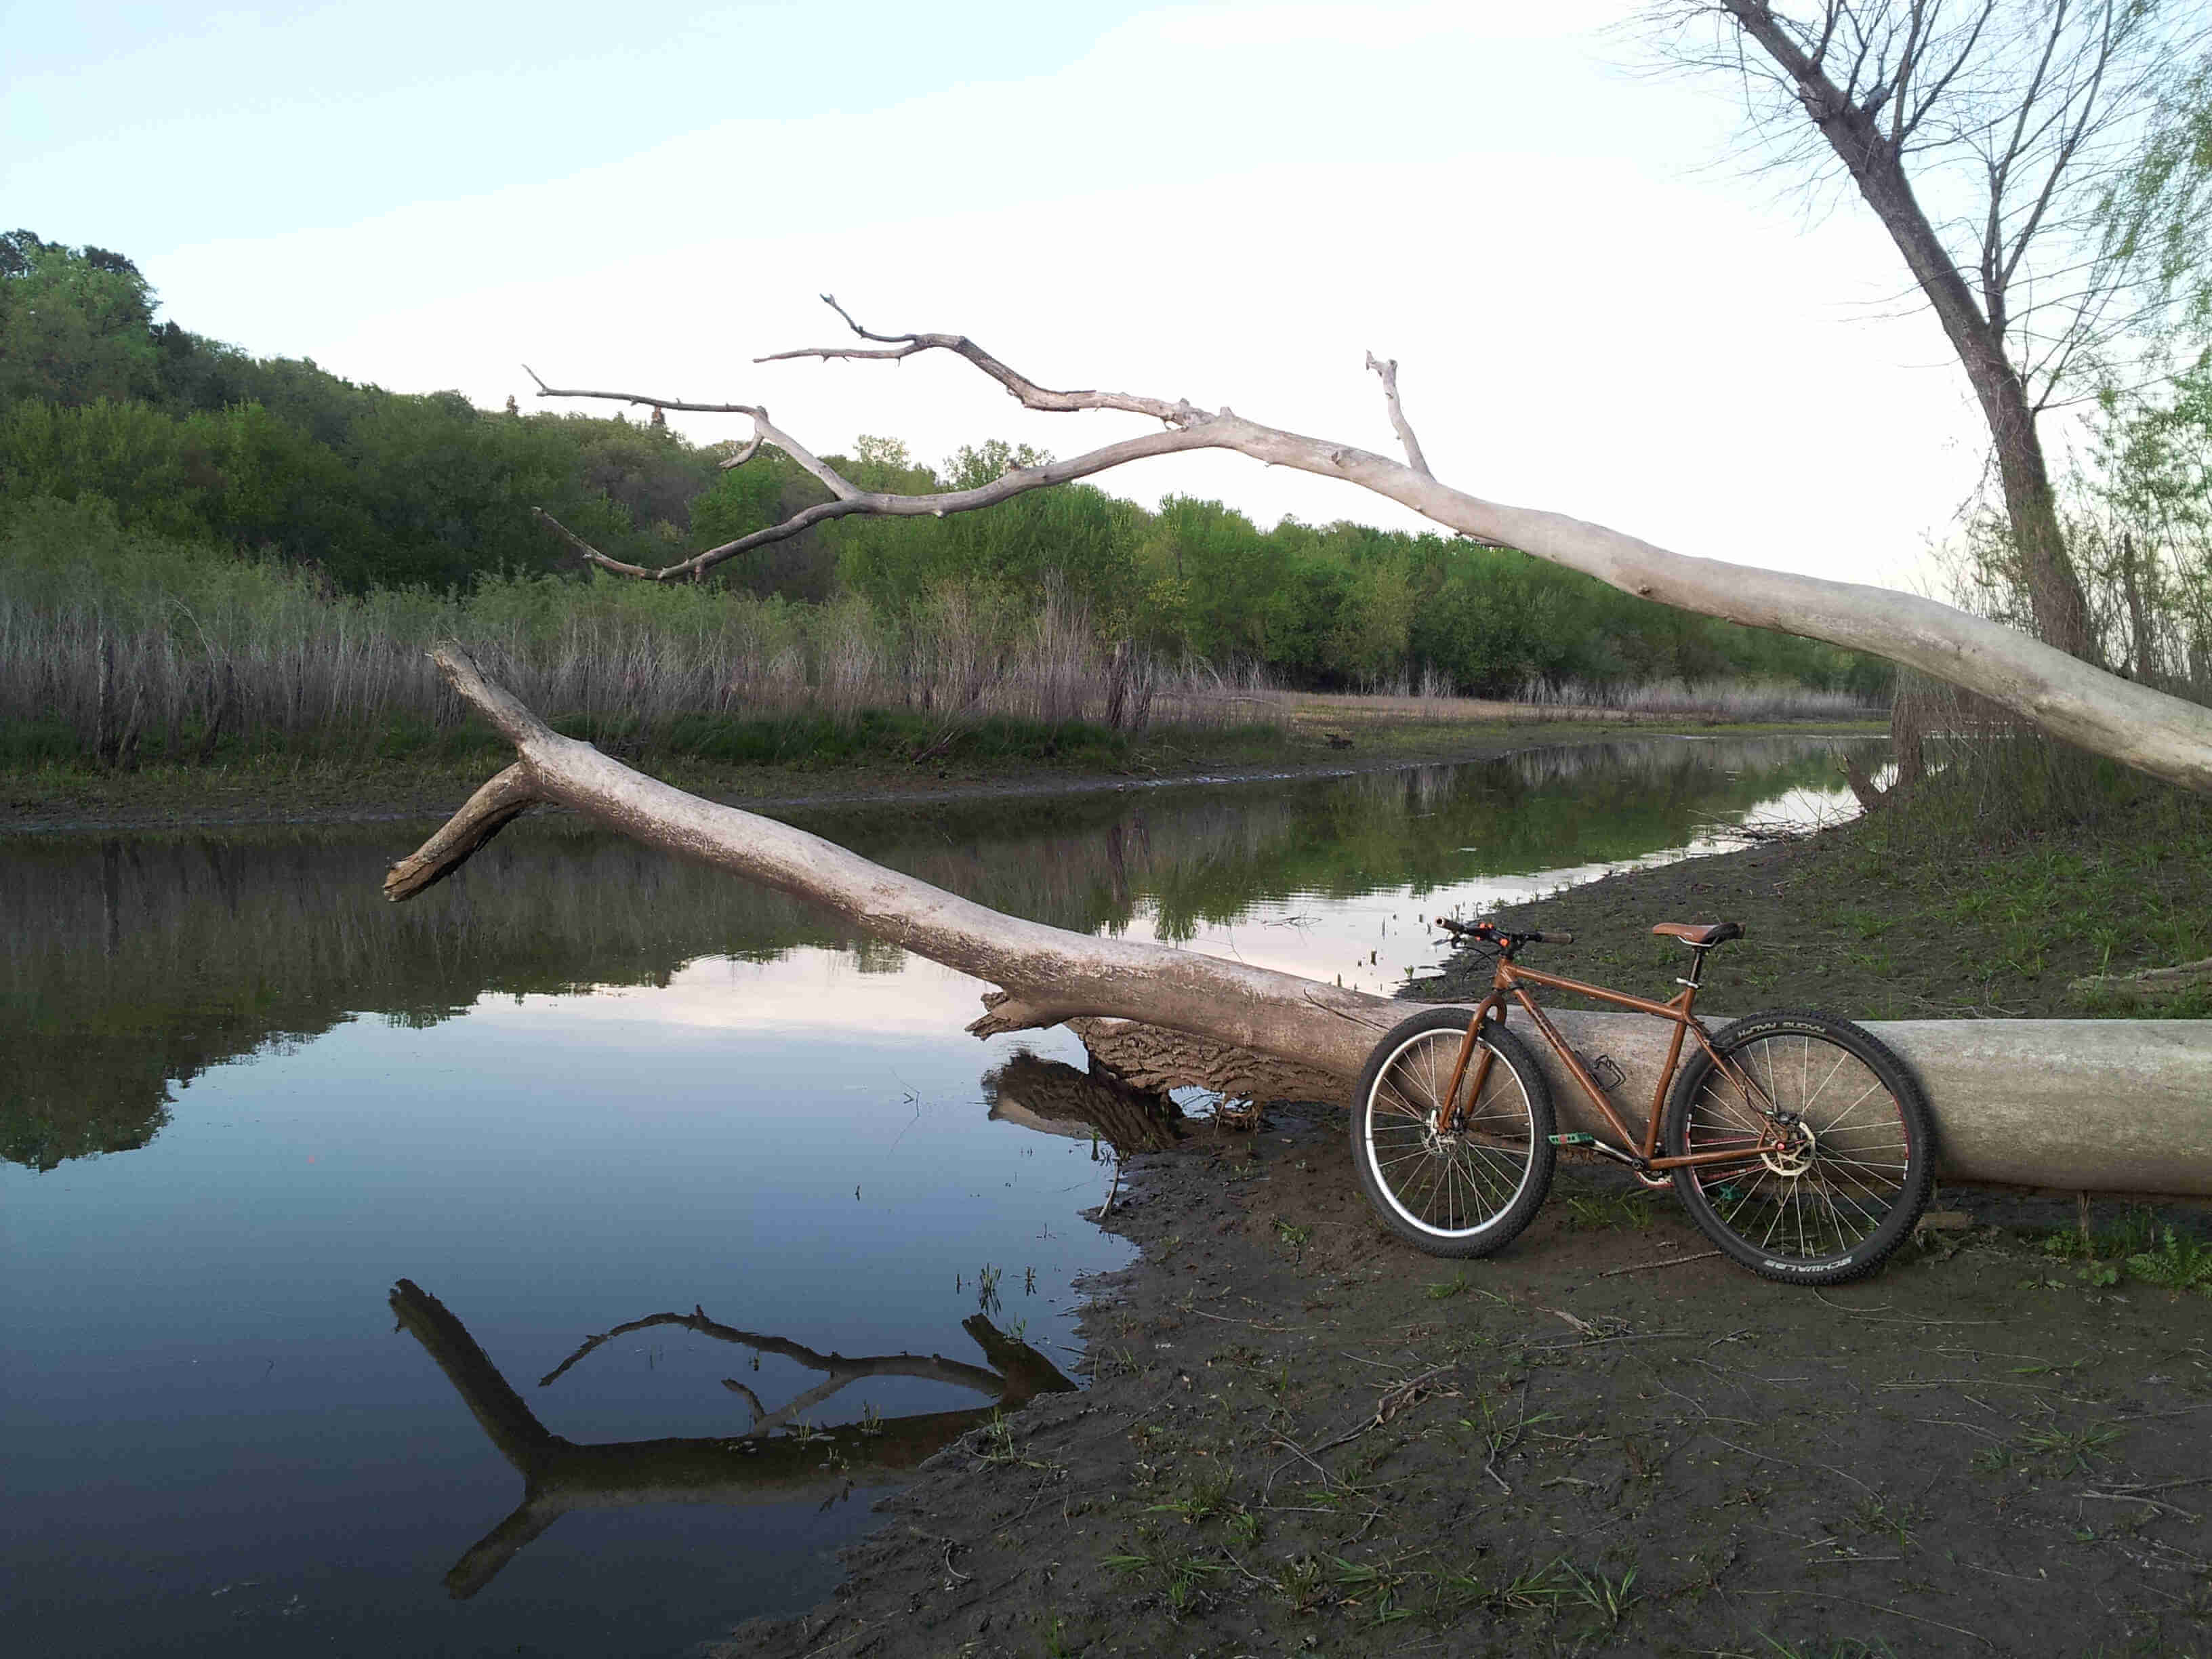 Left side view of a brown Surly Karate Monkey bike, leaning against a downed tree, on a muddy bank facing a river